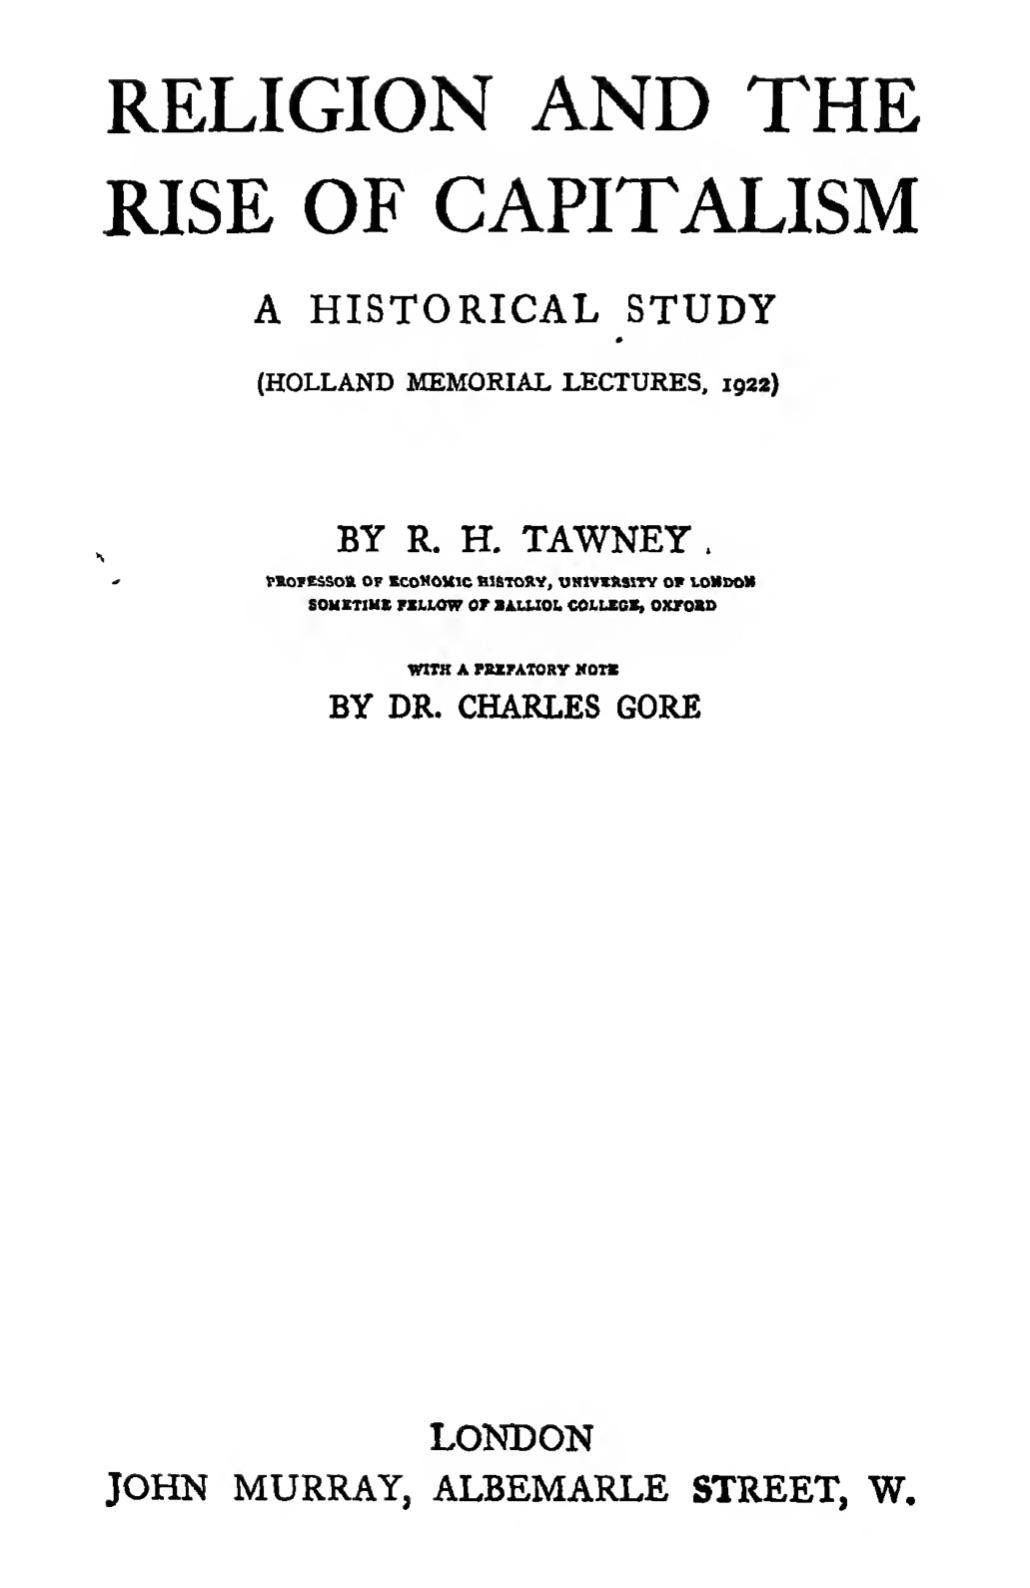 Religion and the Rise of Capitalism (1922) by R. H. Tawney